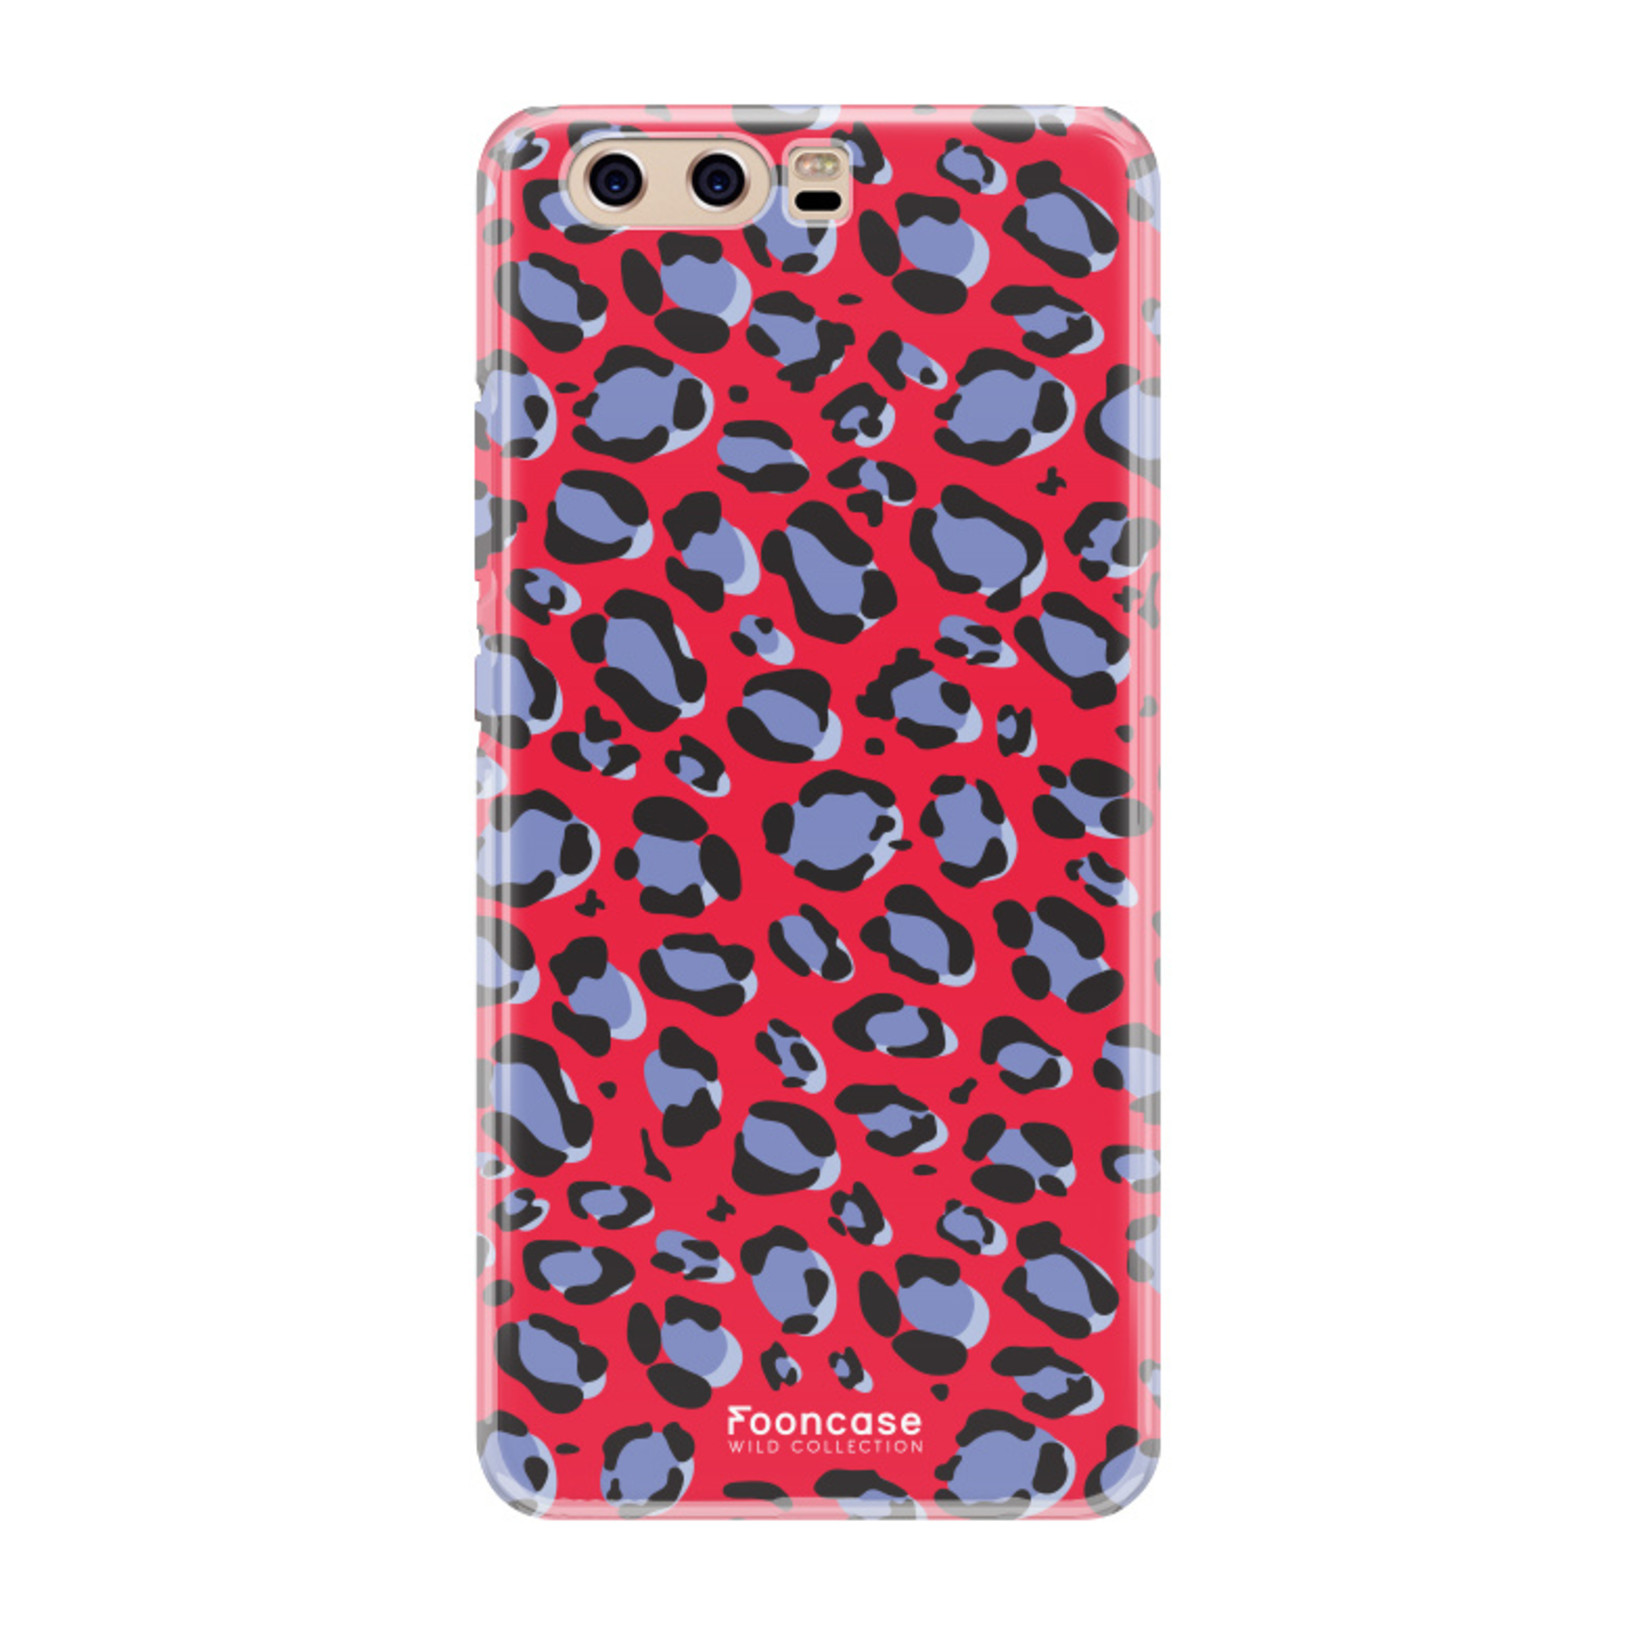 FOONCASE Huawei P10 - WILD COLLECTION / Red